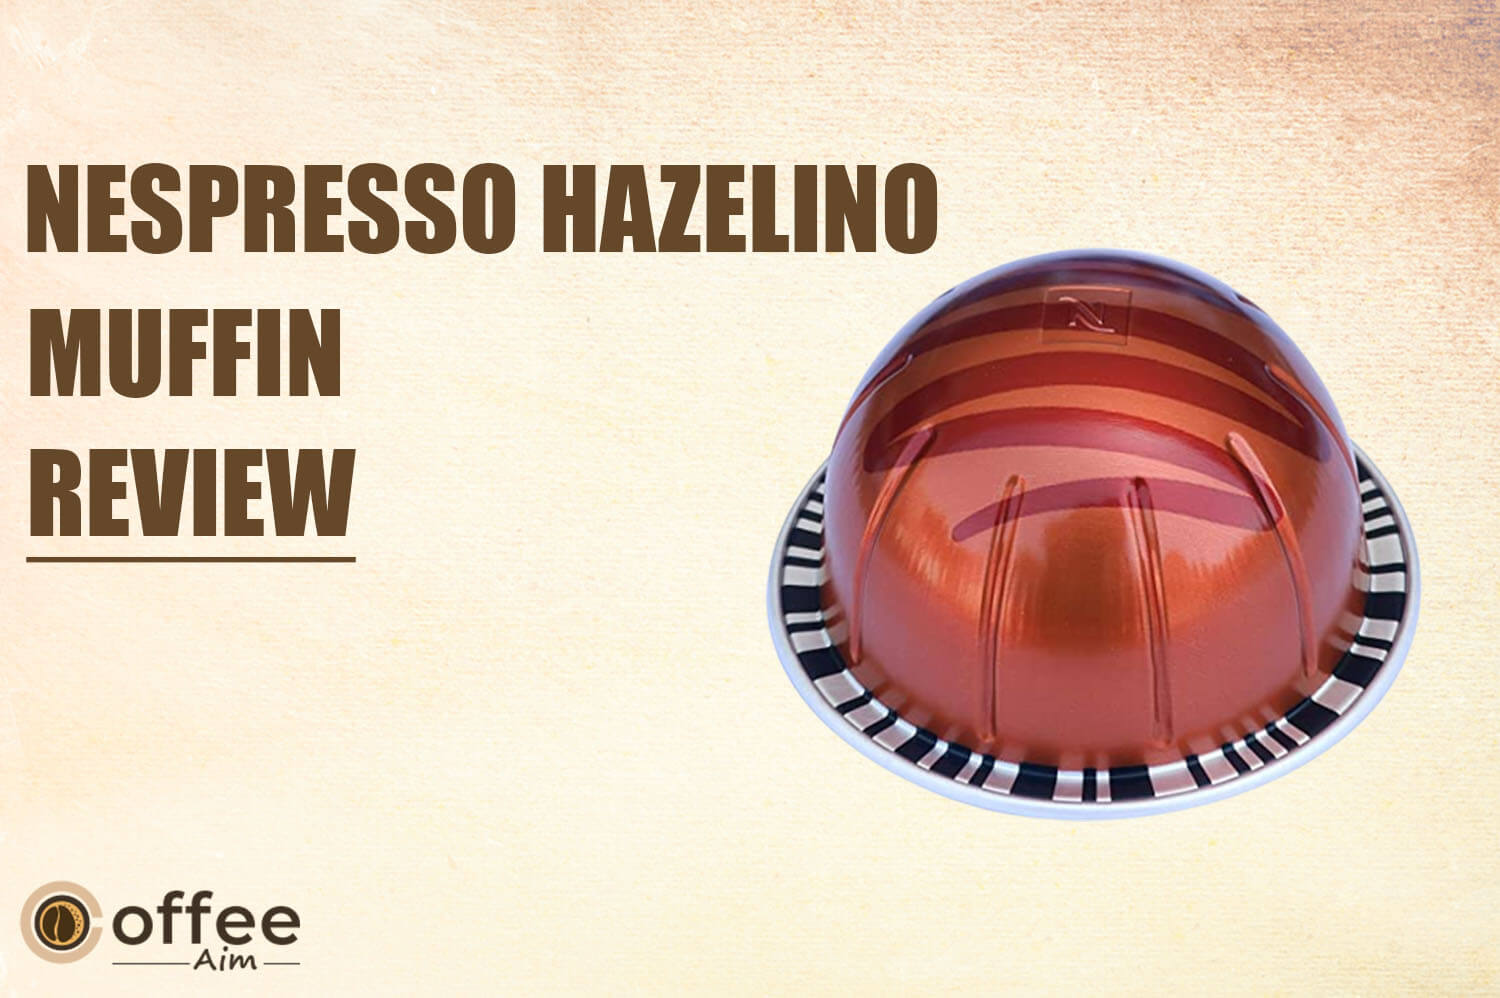 Featured image for the article "Nespresso Hazelino Muffin Review"